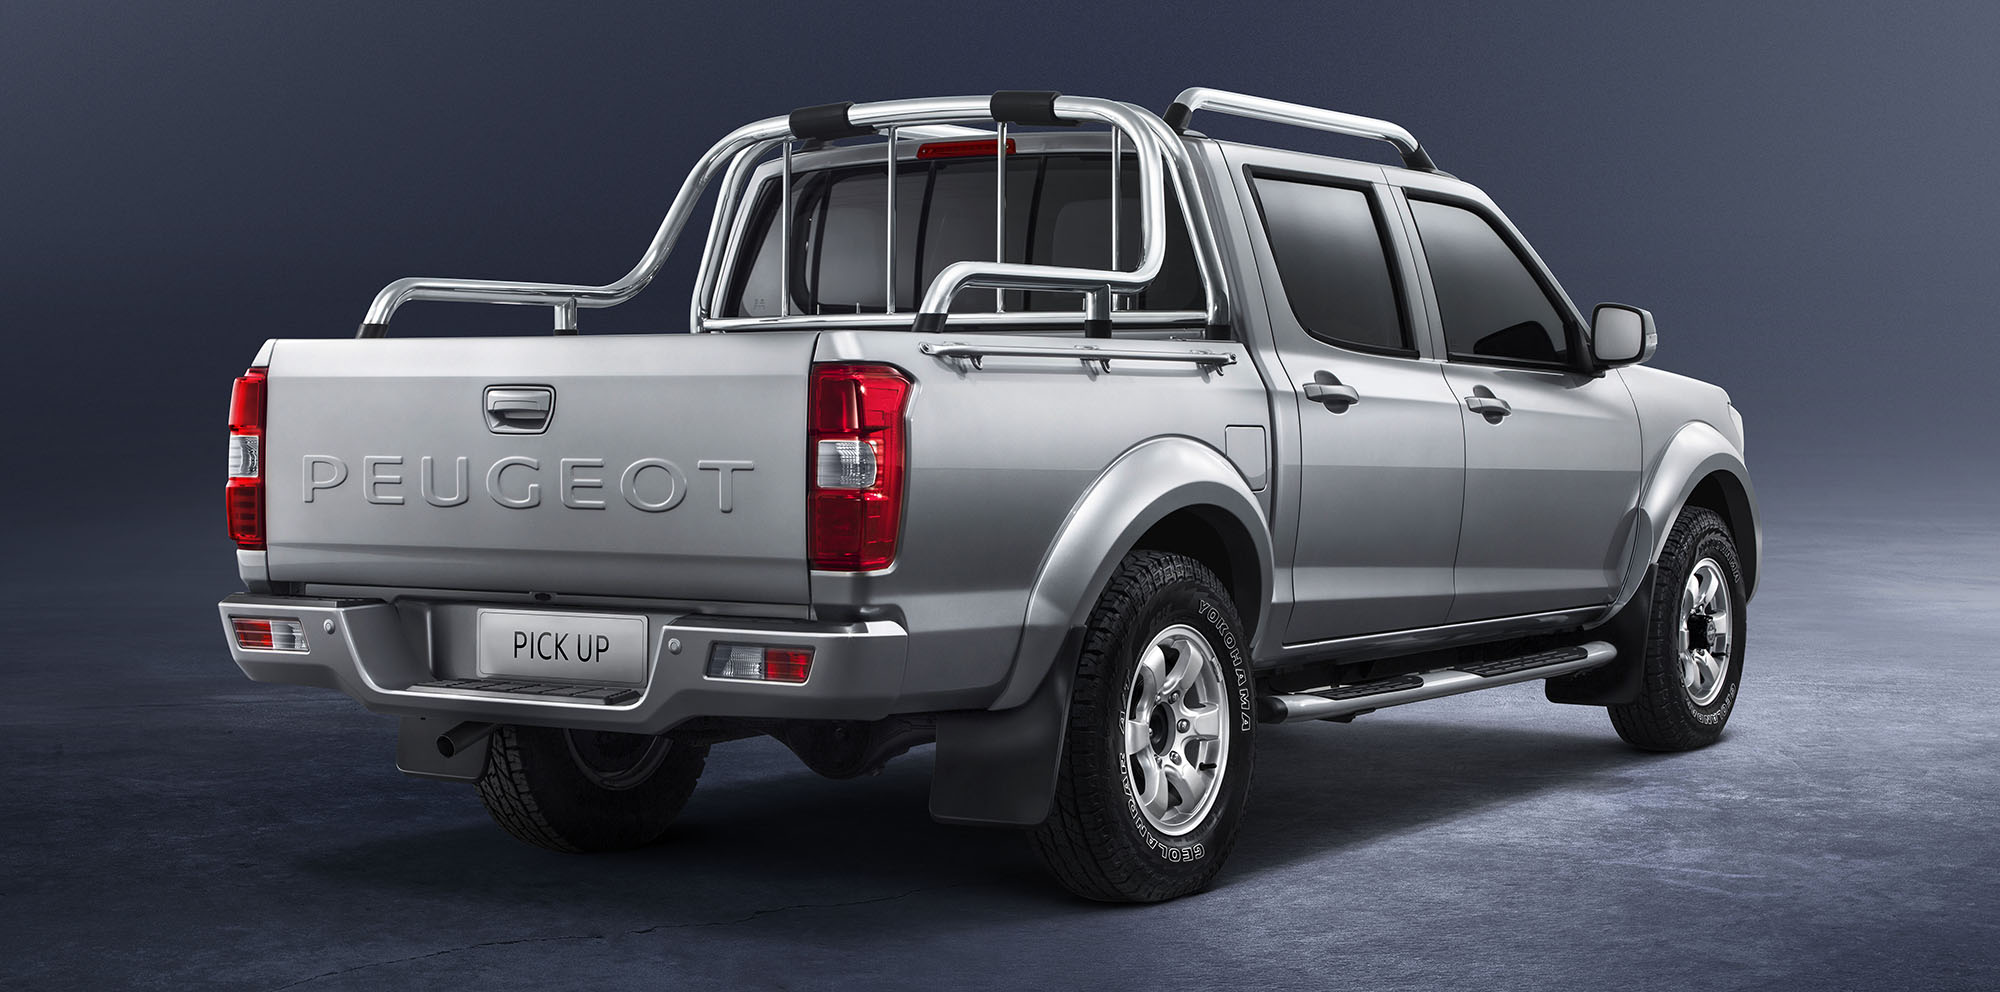 Peugeot Pick Up: Rebadged Chinese ute to go on sale in Africa  Photos 1 of 3